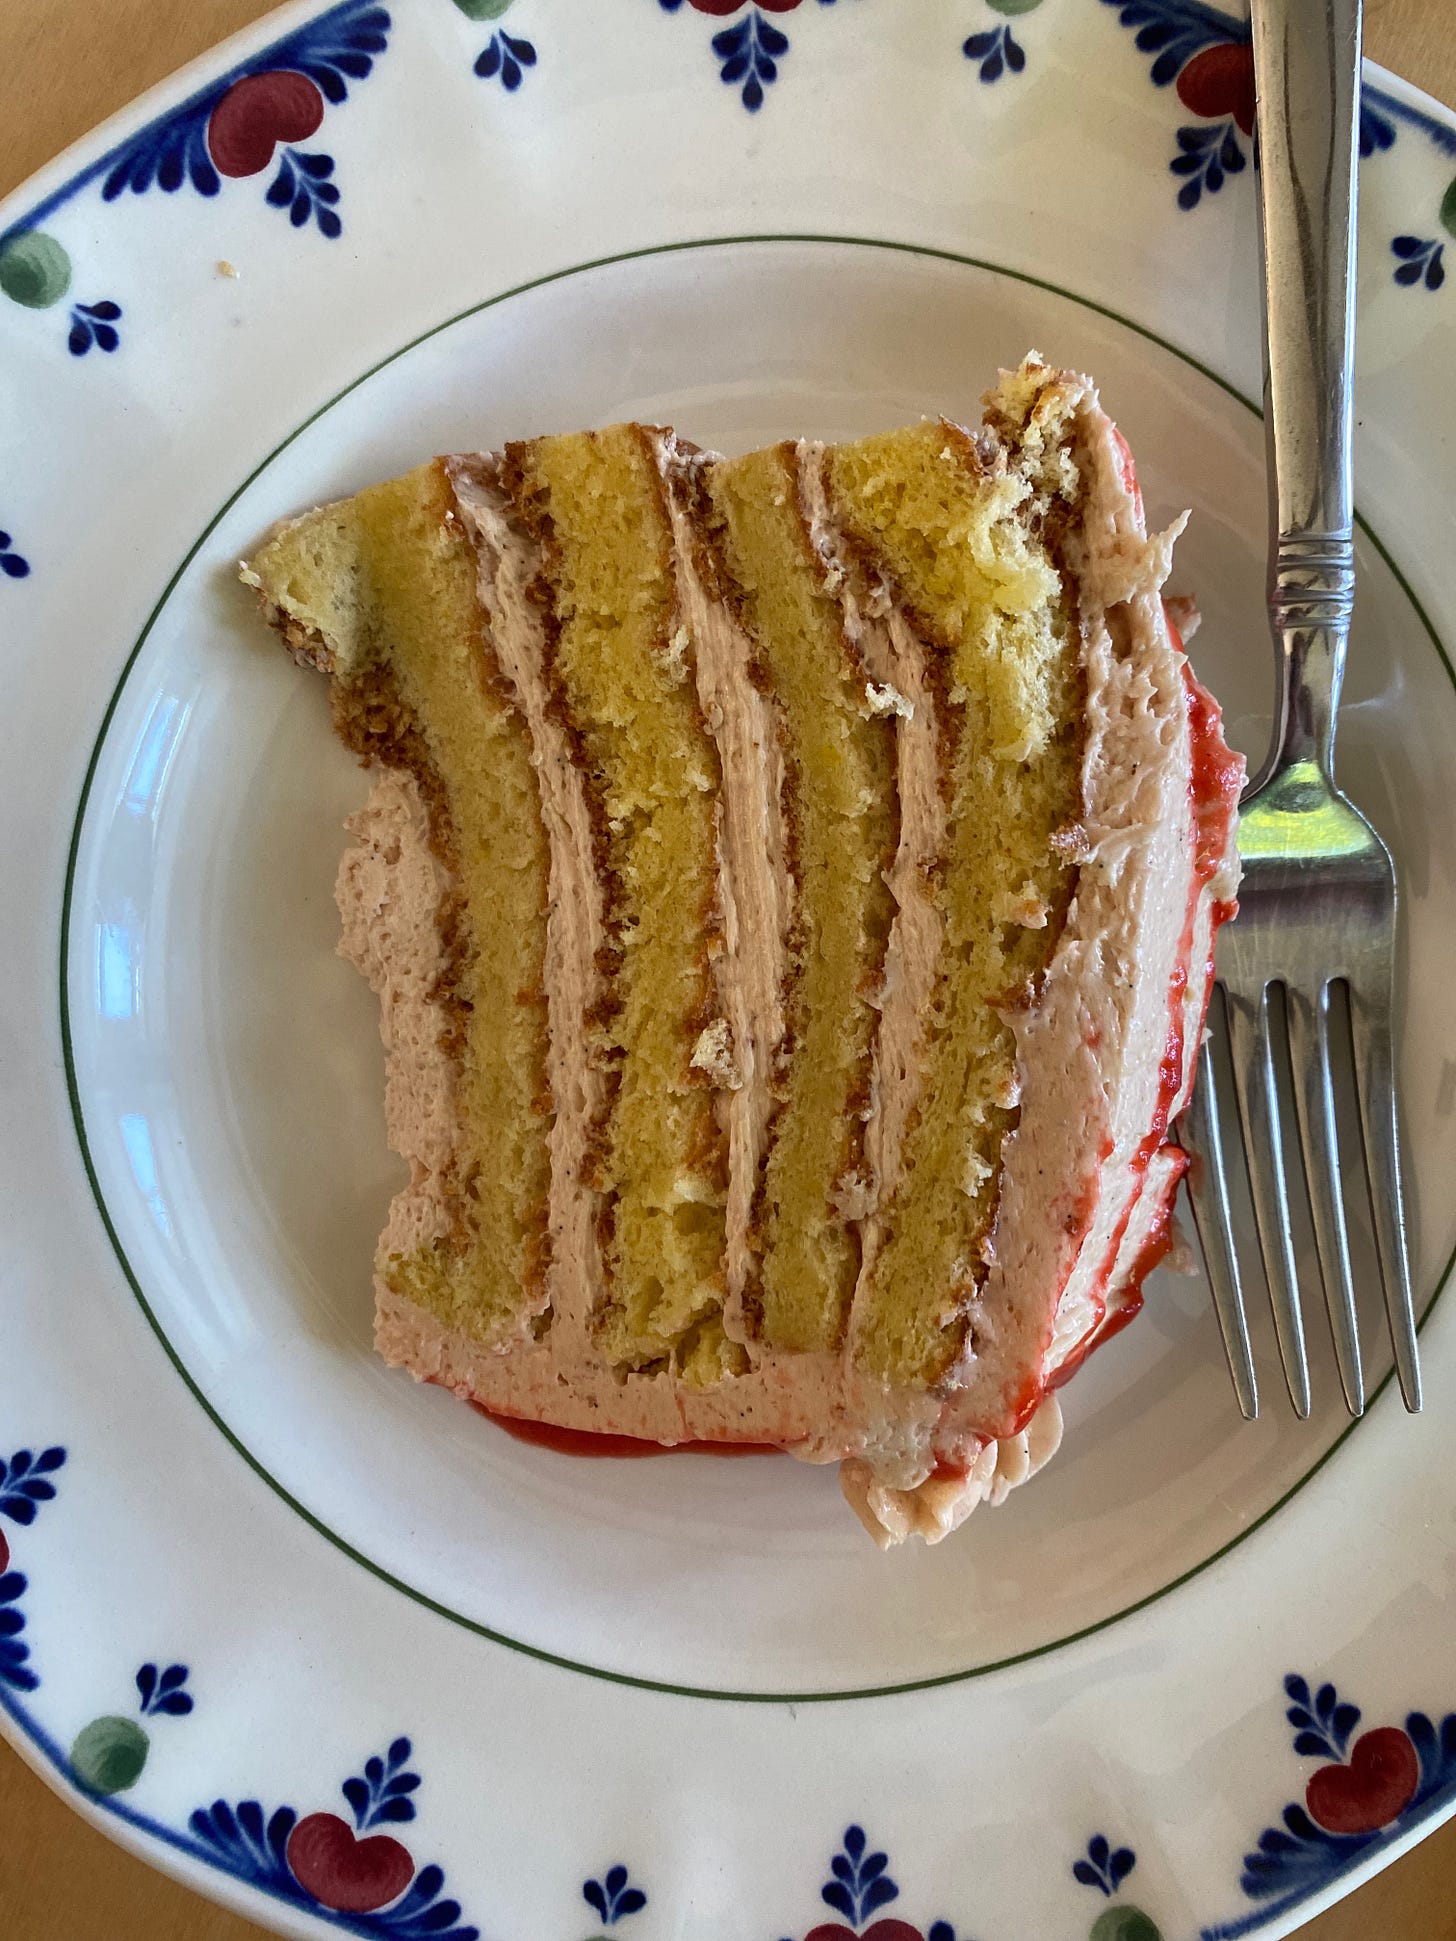 A slice of four-layer lemon cake with pink raspberry icing on a ceramic plate.